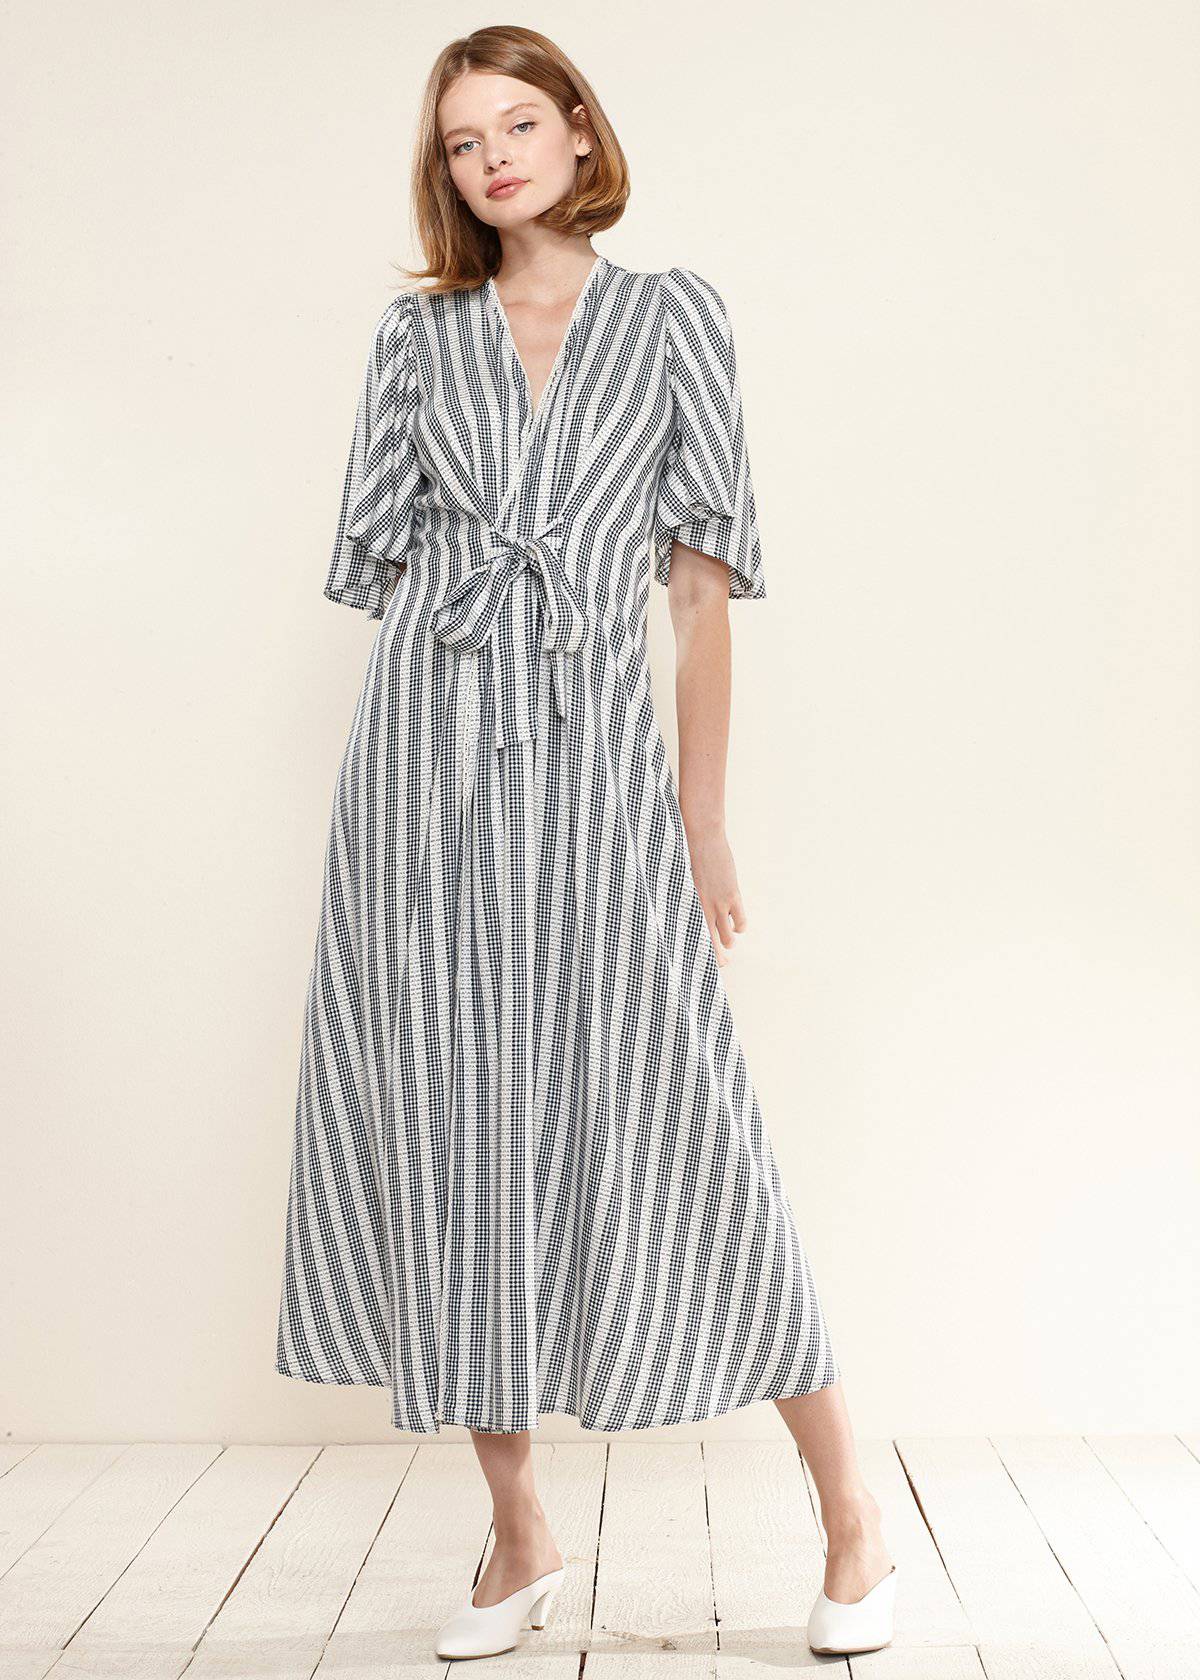 Lace Trim Tie Front Maxi Dress in Ditsy Gingham